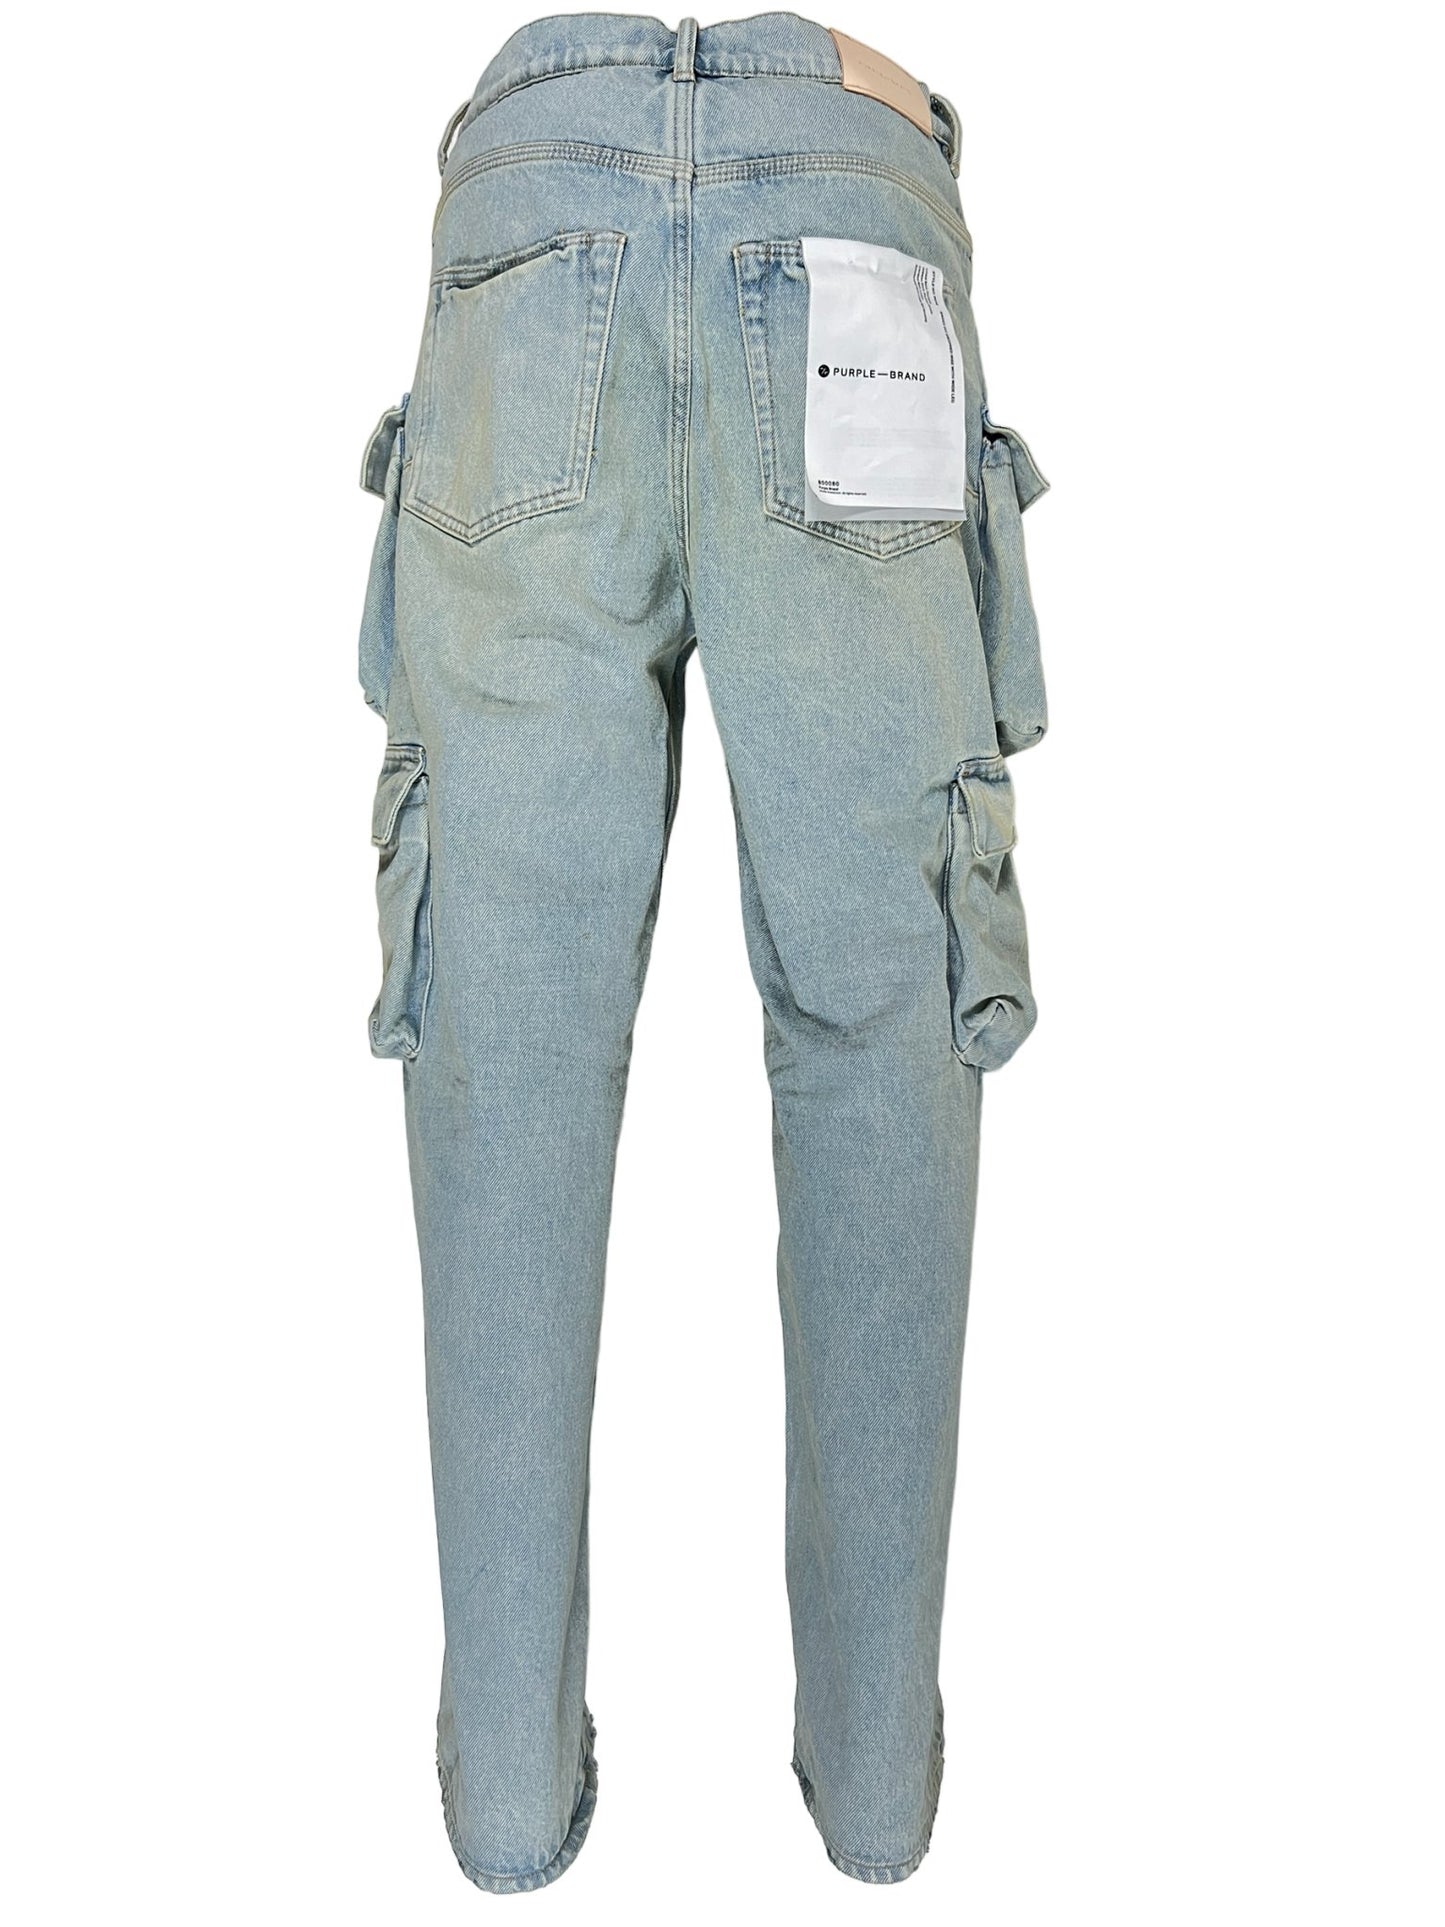 Relaxed cargo denim jeans by Purple brand